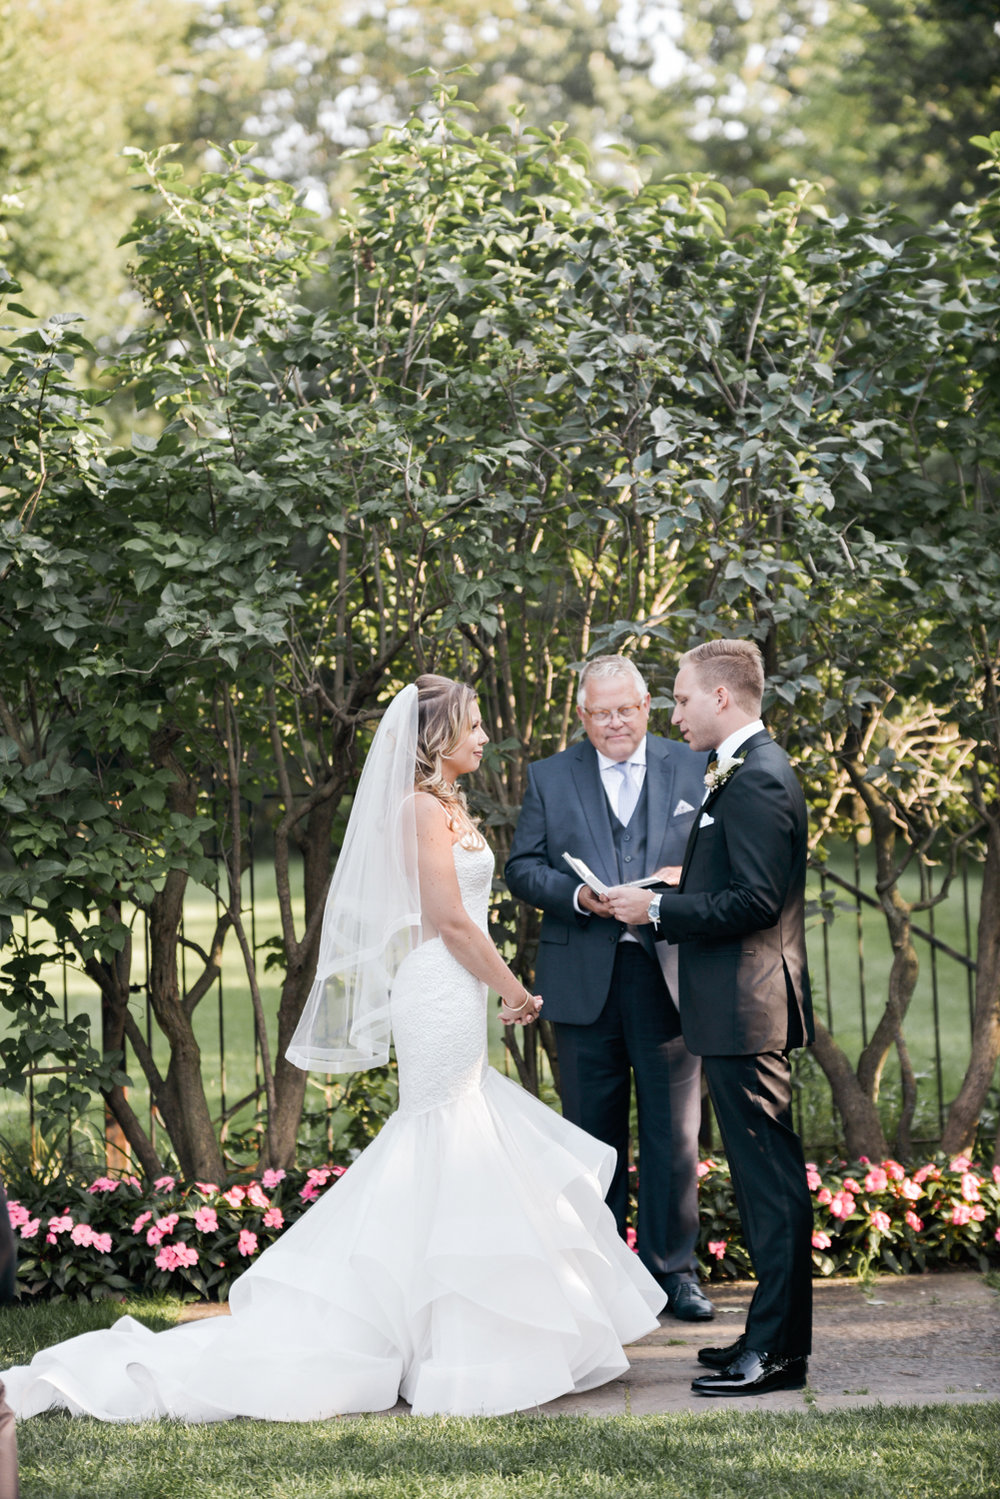 Saying vows in an outdoor ceremony at Graydon HAll